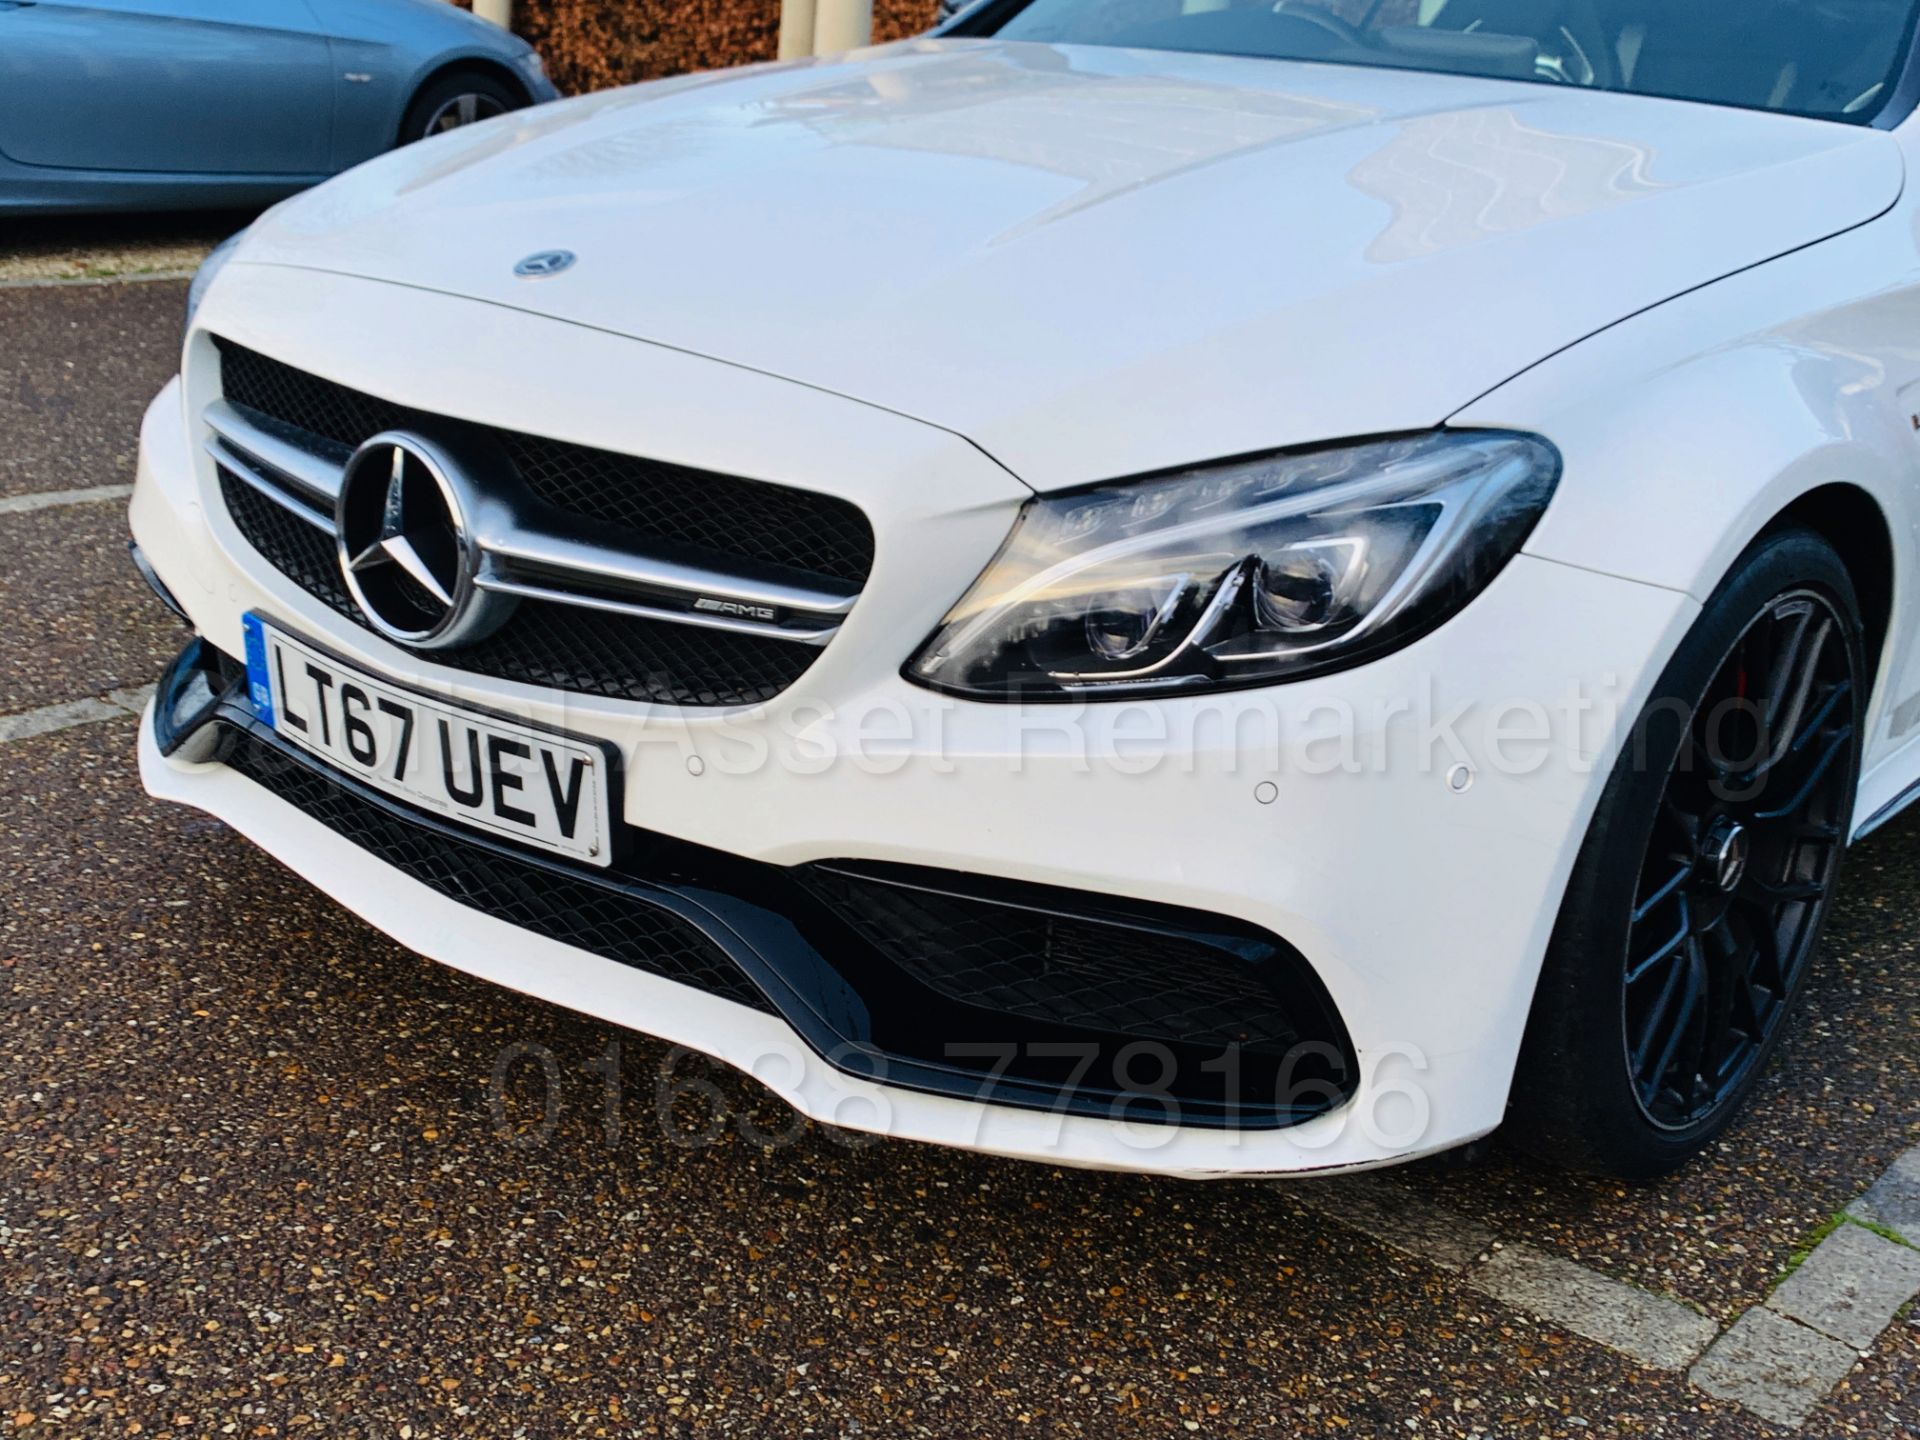 (On Sale) MERCEDES-BENZ AMG C63-S *CABRIOLET* (67 REG) '4.0 BI-TURBO -510 BHP - AUTO' *FULLY LOADED* - Image 26 of 79